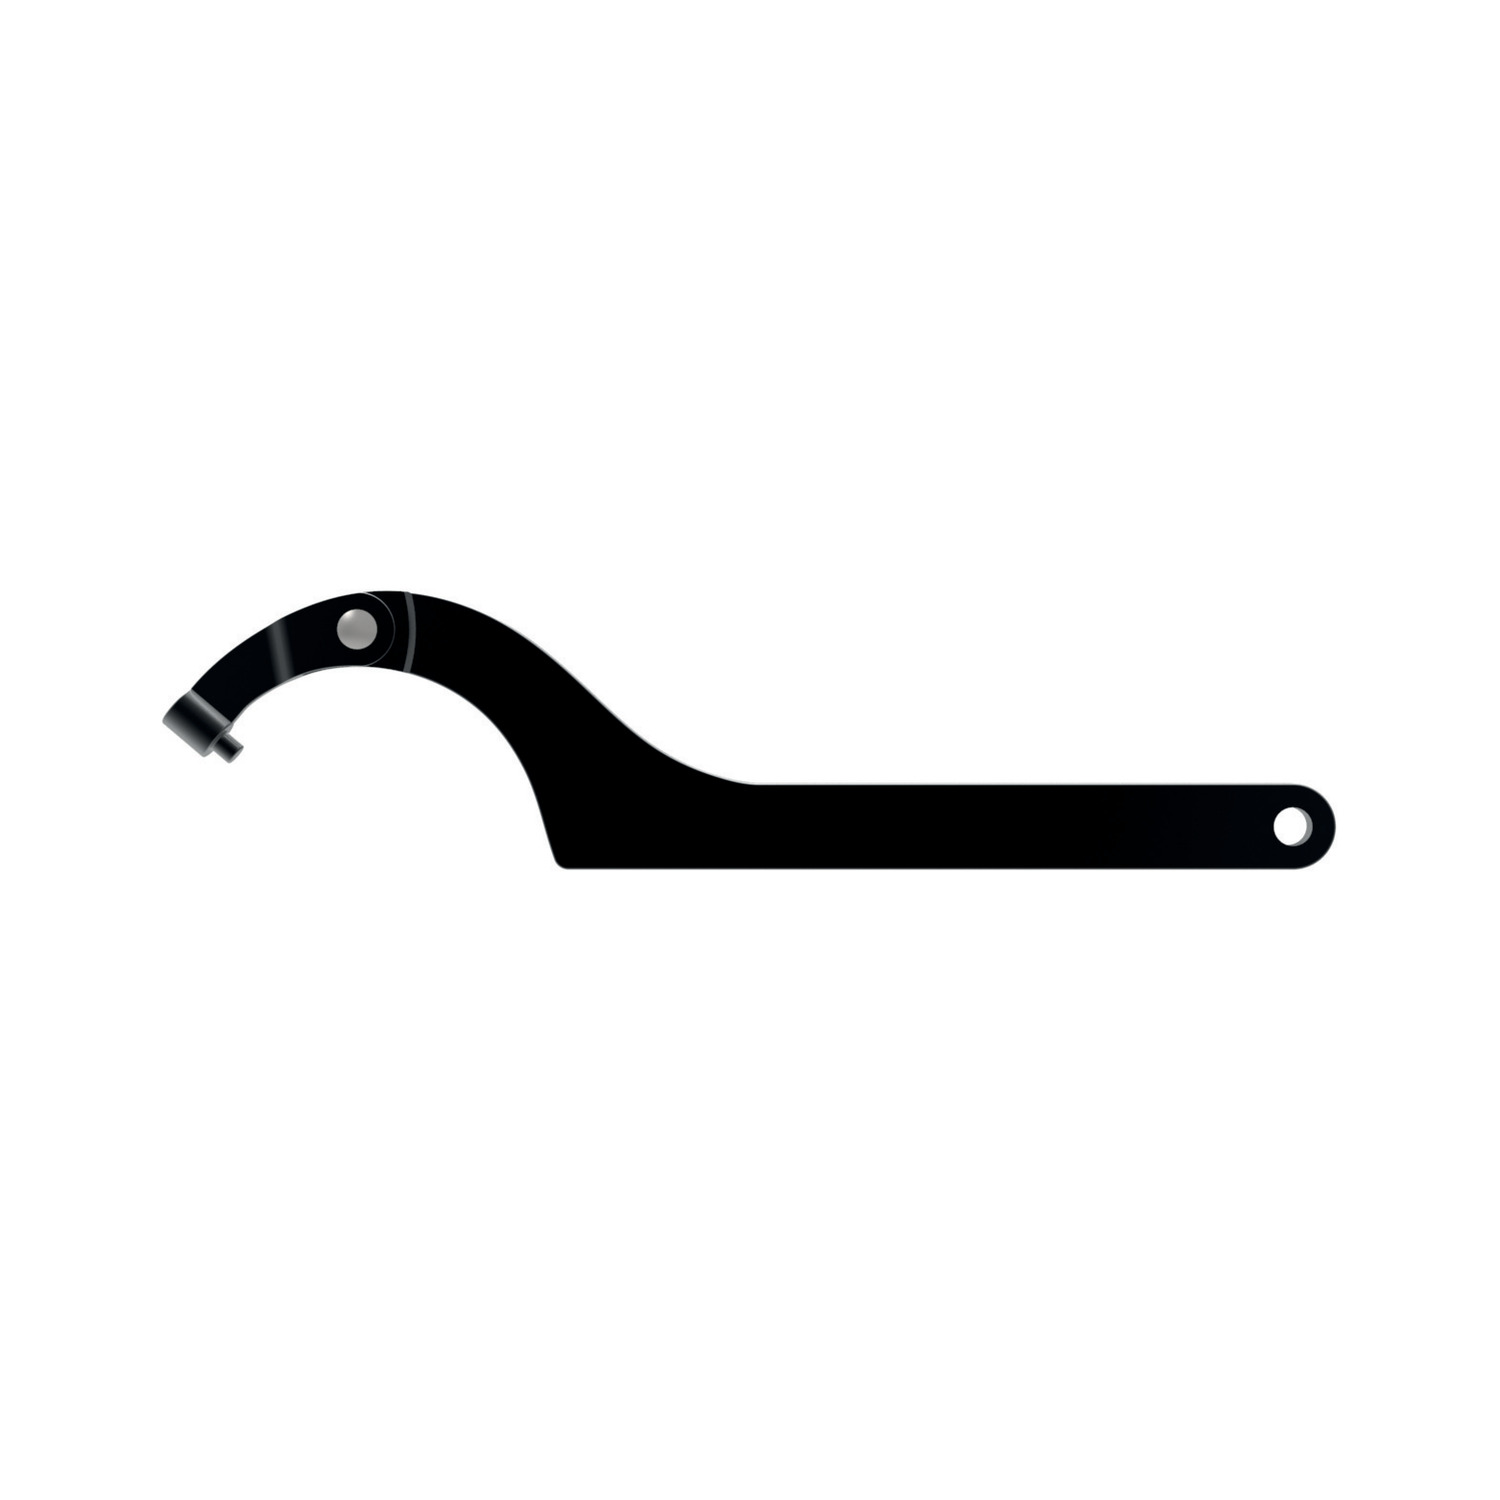 95151 - Hook Spanners - with Pin Nose